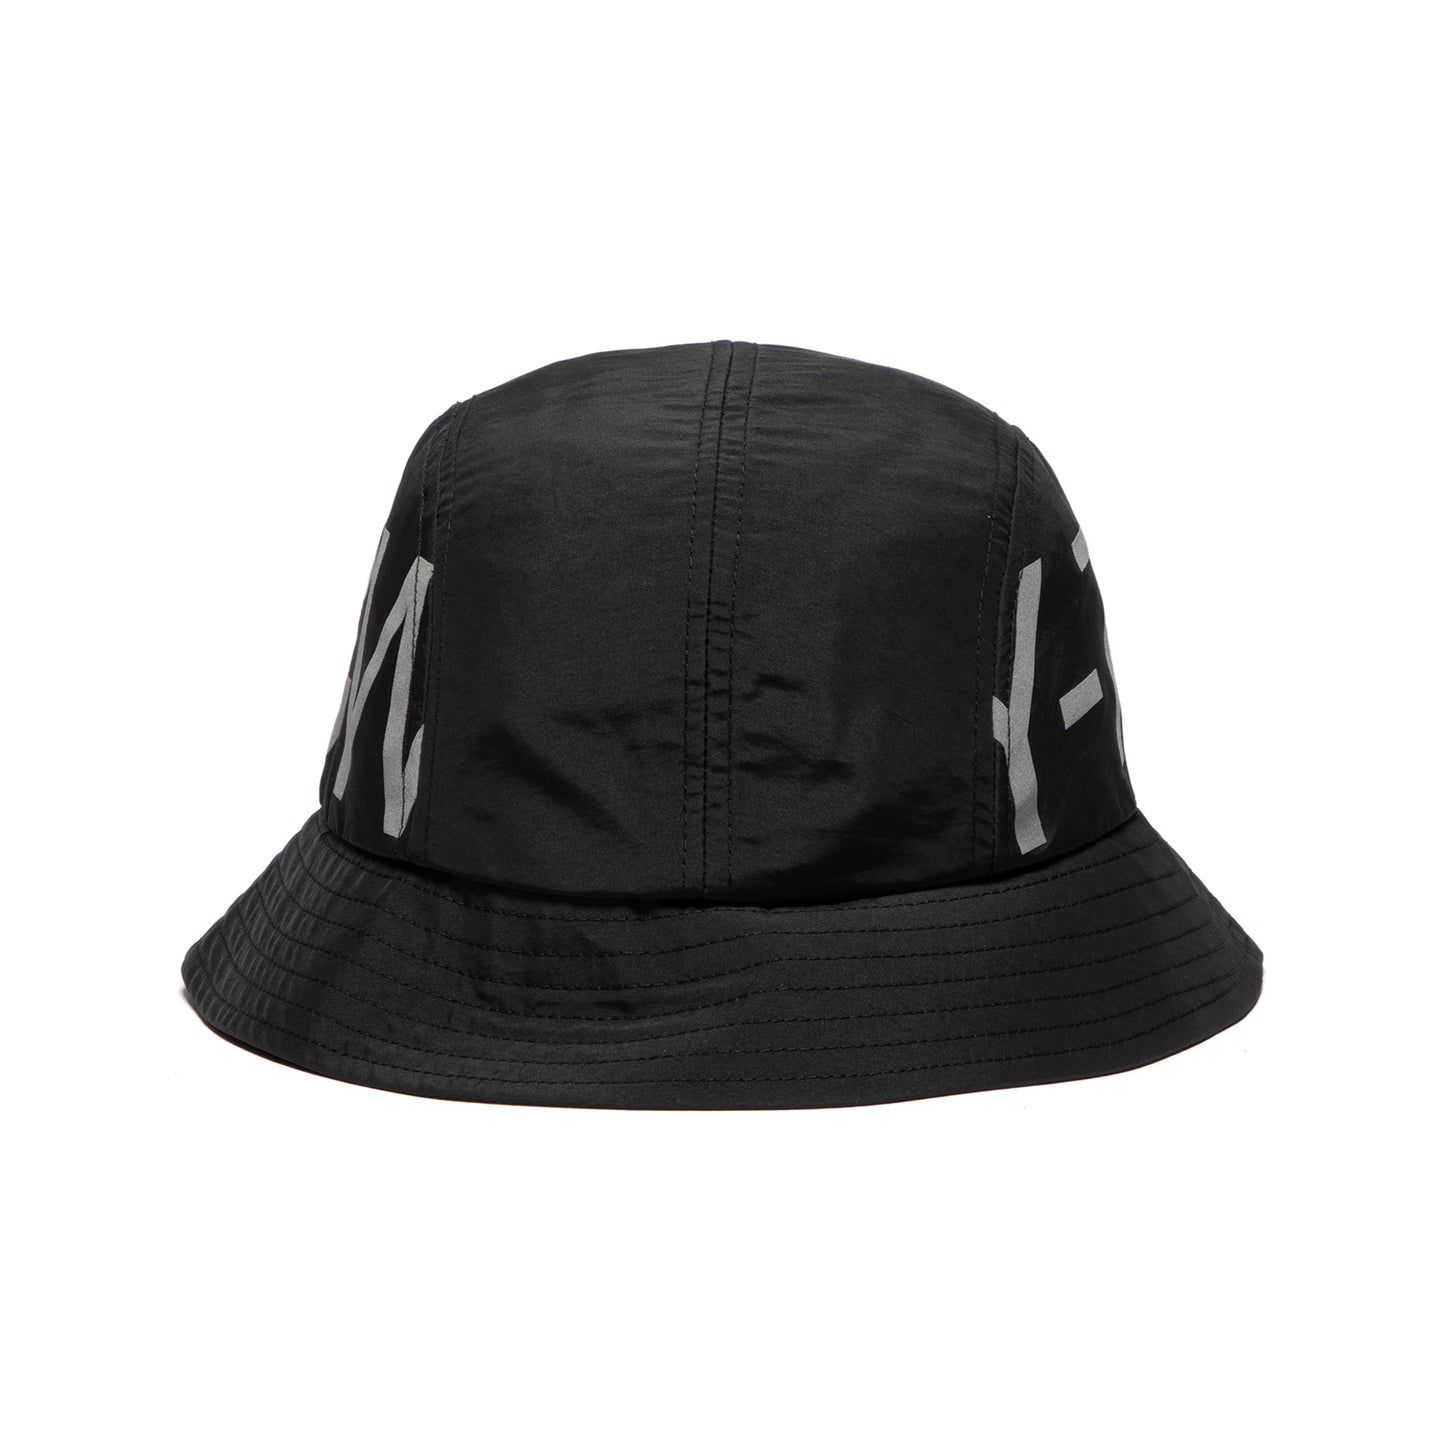 A-COLD-WALL Code Bucket Hat (Black)